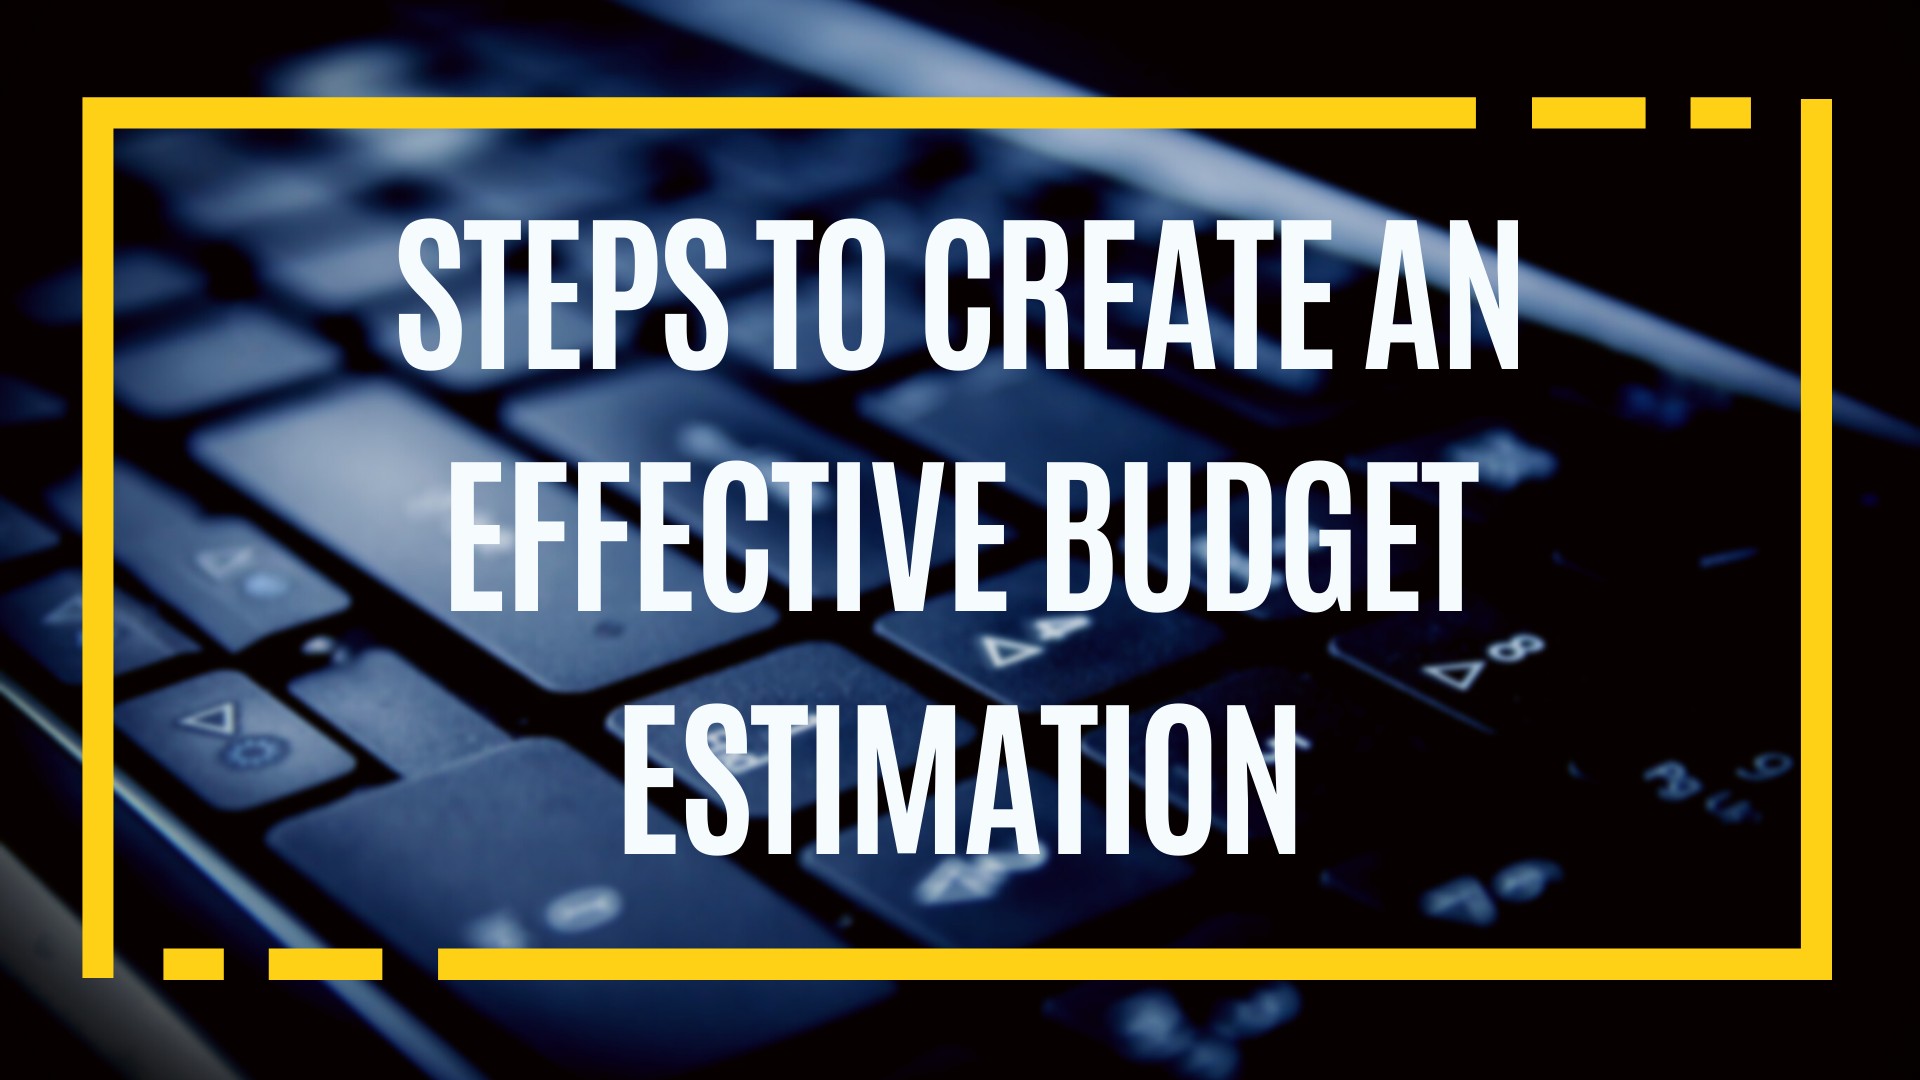 Steps to Create an Effective Budget Estimation